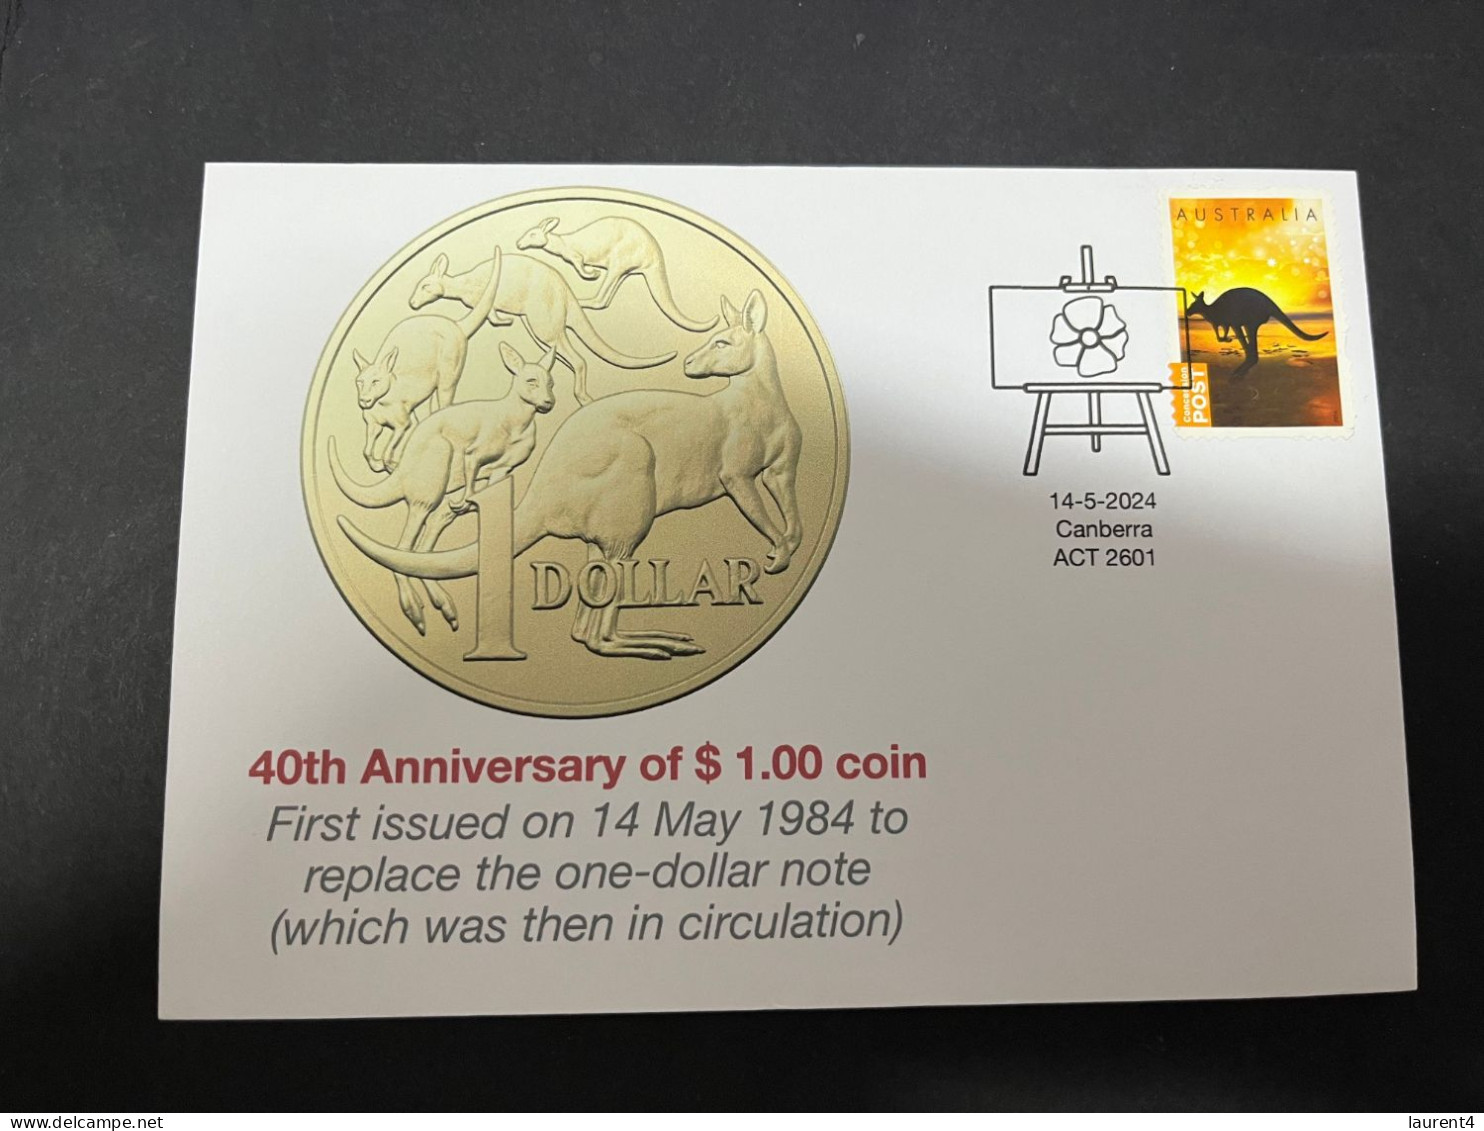 15-5-2024 (5 Z 12) Australia - 40th Anniversary Of The $ 1.00 Coin Released For 1st Time In Australia On 14-5-1984 - Monete